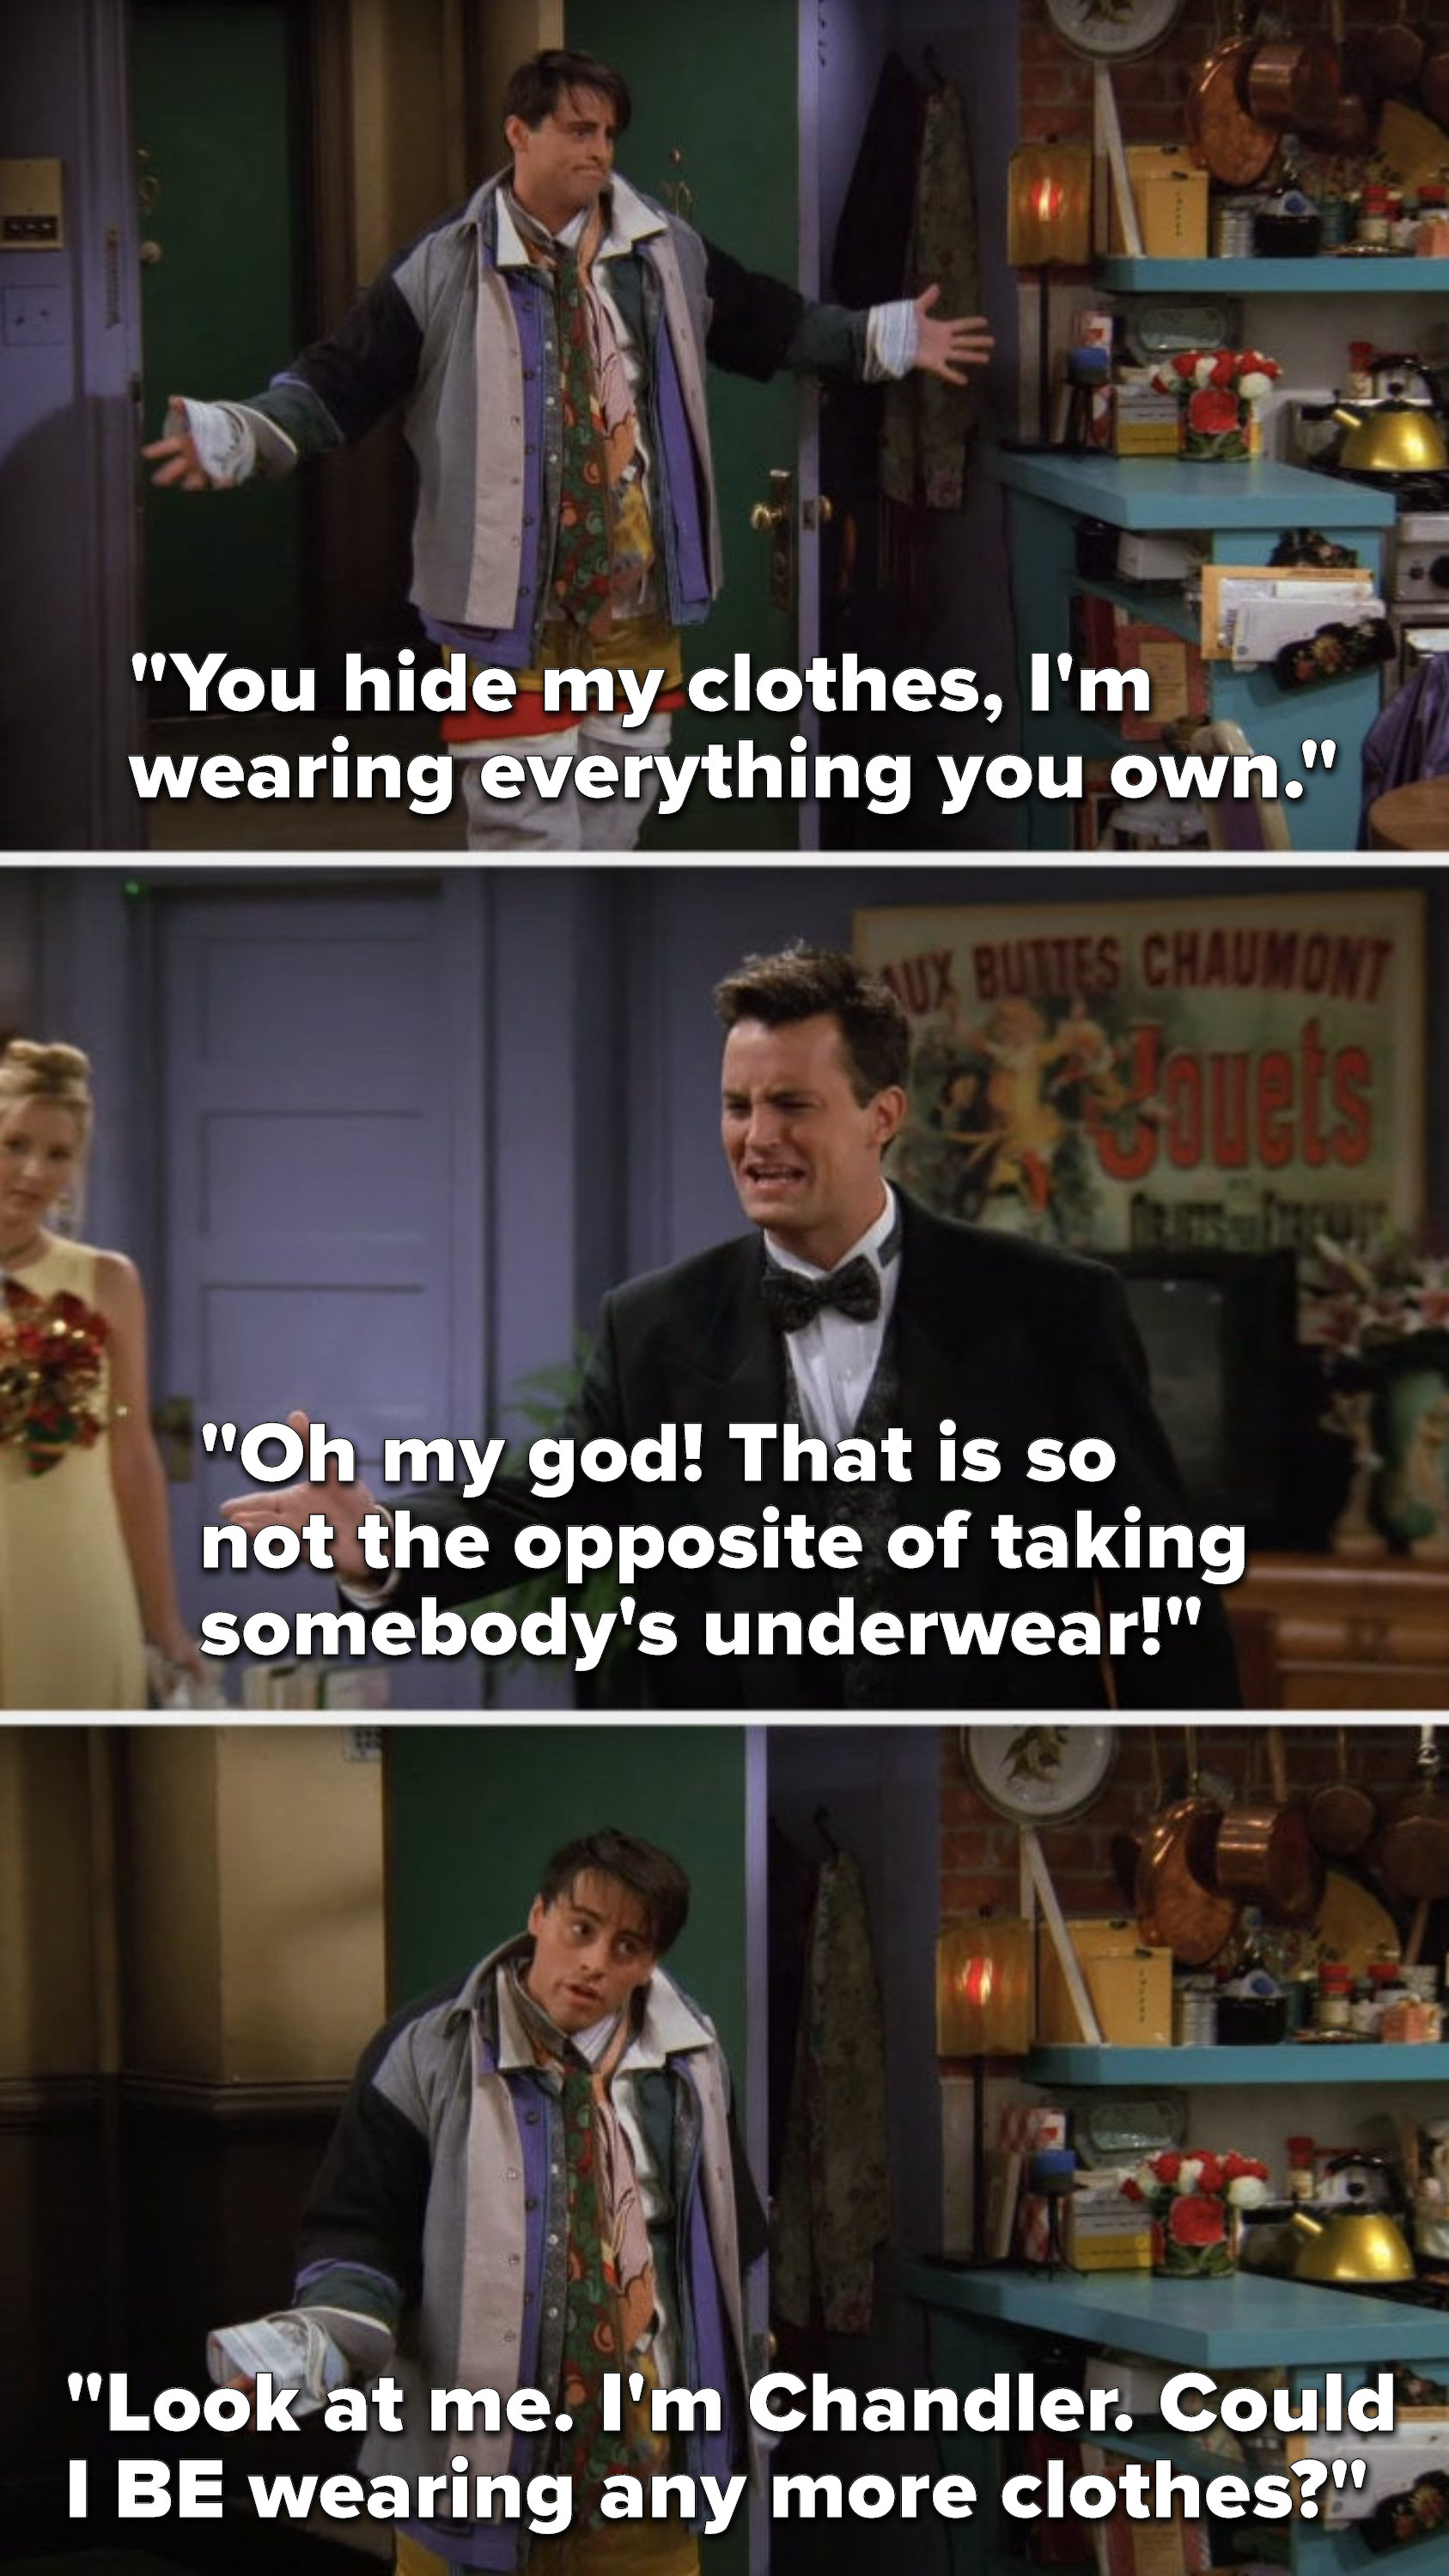 Joey says, &quot;You hide my clothes, I&#x27;m wearing everything you own,&quot; Chandler says, &quot;Oh my god, that is so not the opposite of taking somebody&#x27;s underwear,&quot; and Joey says, &quot;Look at me, I&#x27;m Chandler, could I be wearing any more clothes&quot;